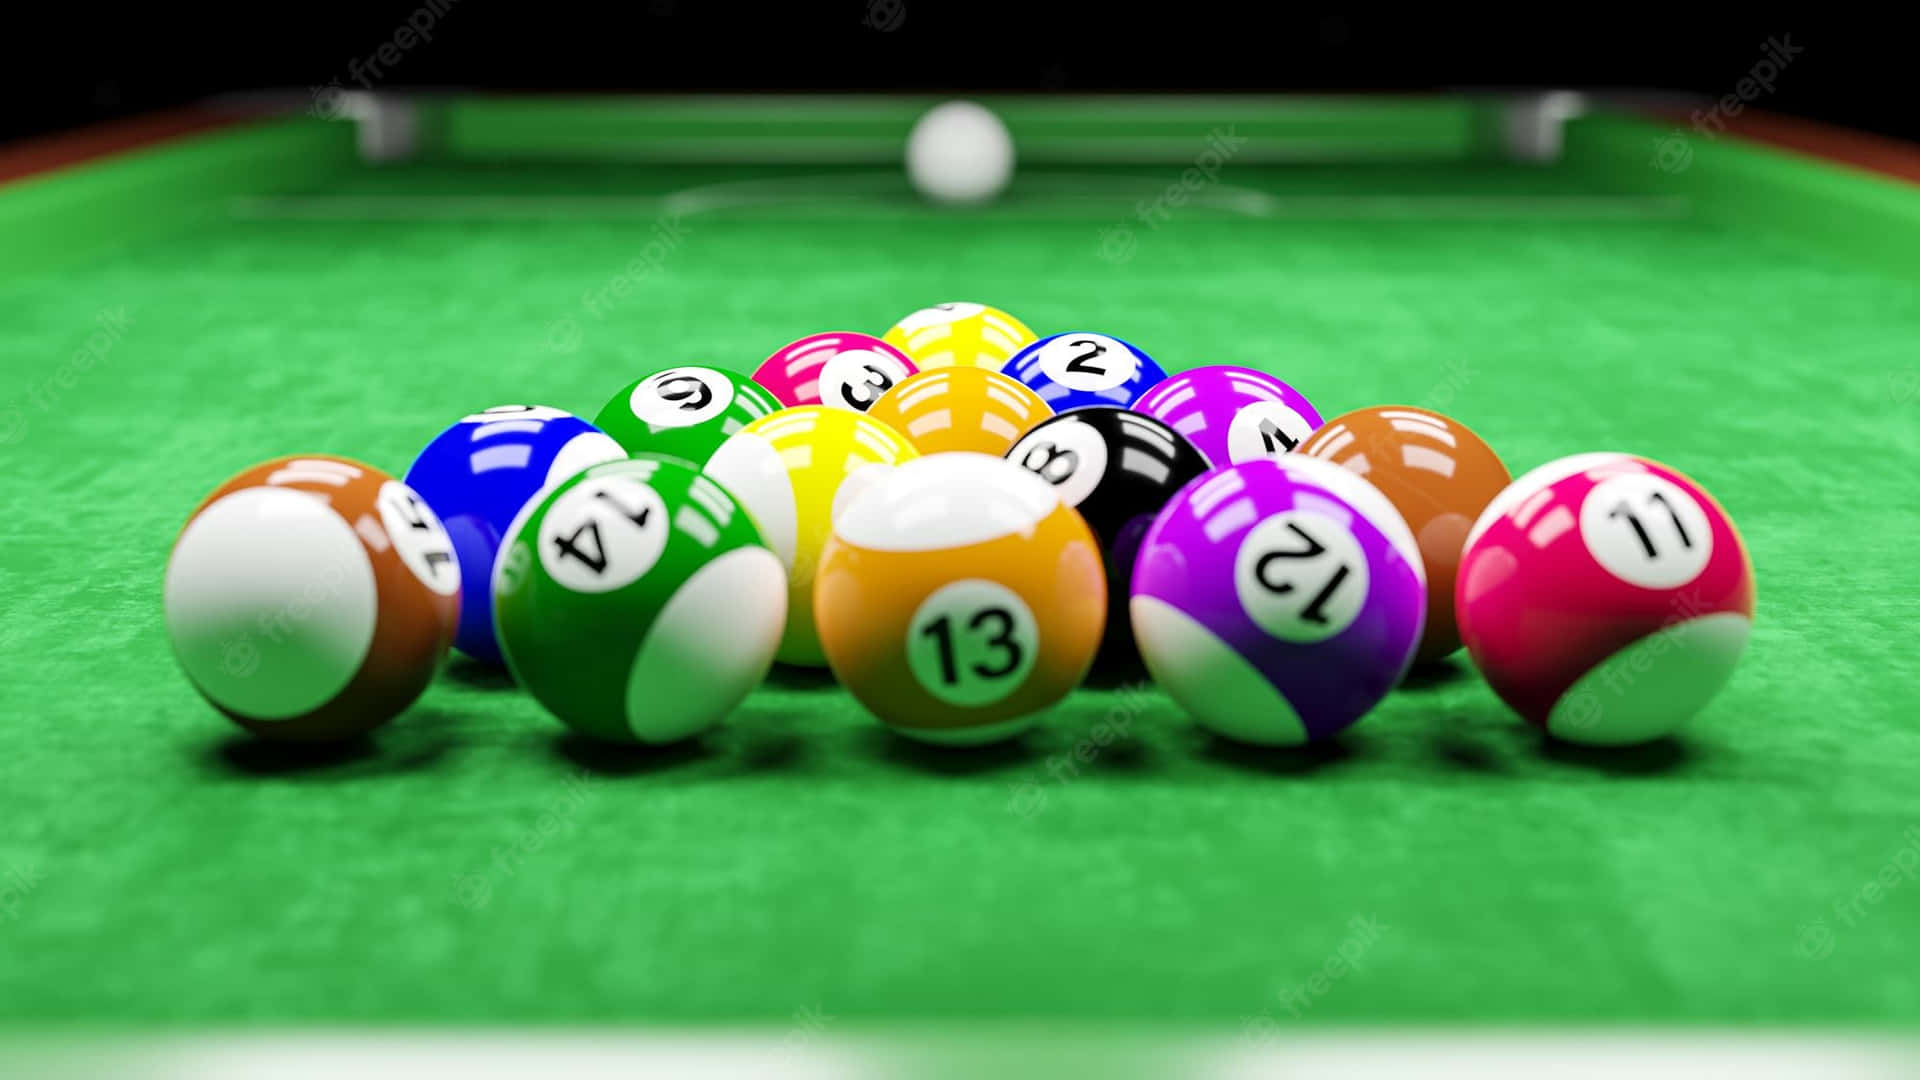 Amazon.com : FHZON 7x5ft Birthday Party Backdrop Billiard Pool Balls  Photography Backgrounds Snooker Contest Beginning Entertainment Game Theme  Party Wallpaper Photo Booth Prop BJYYFH170 : Electronics